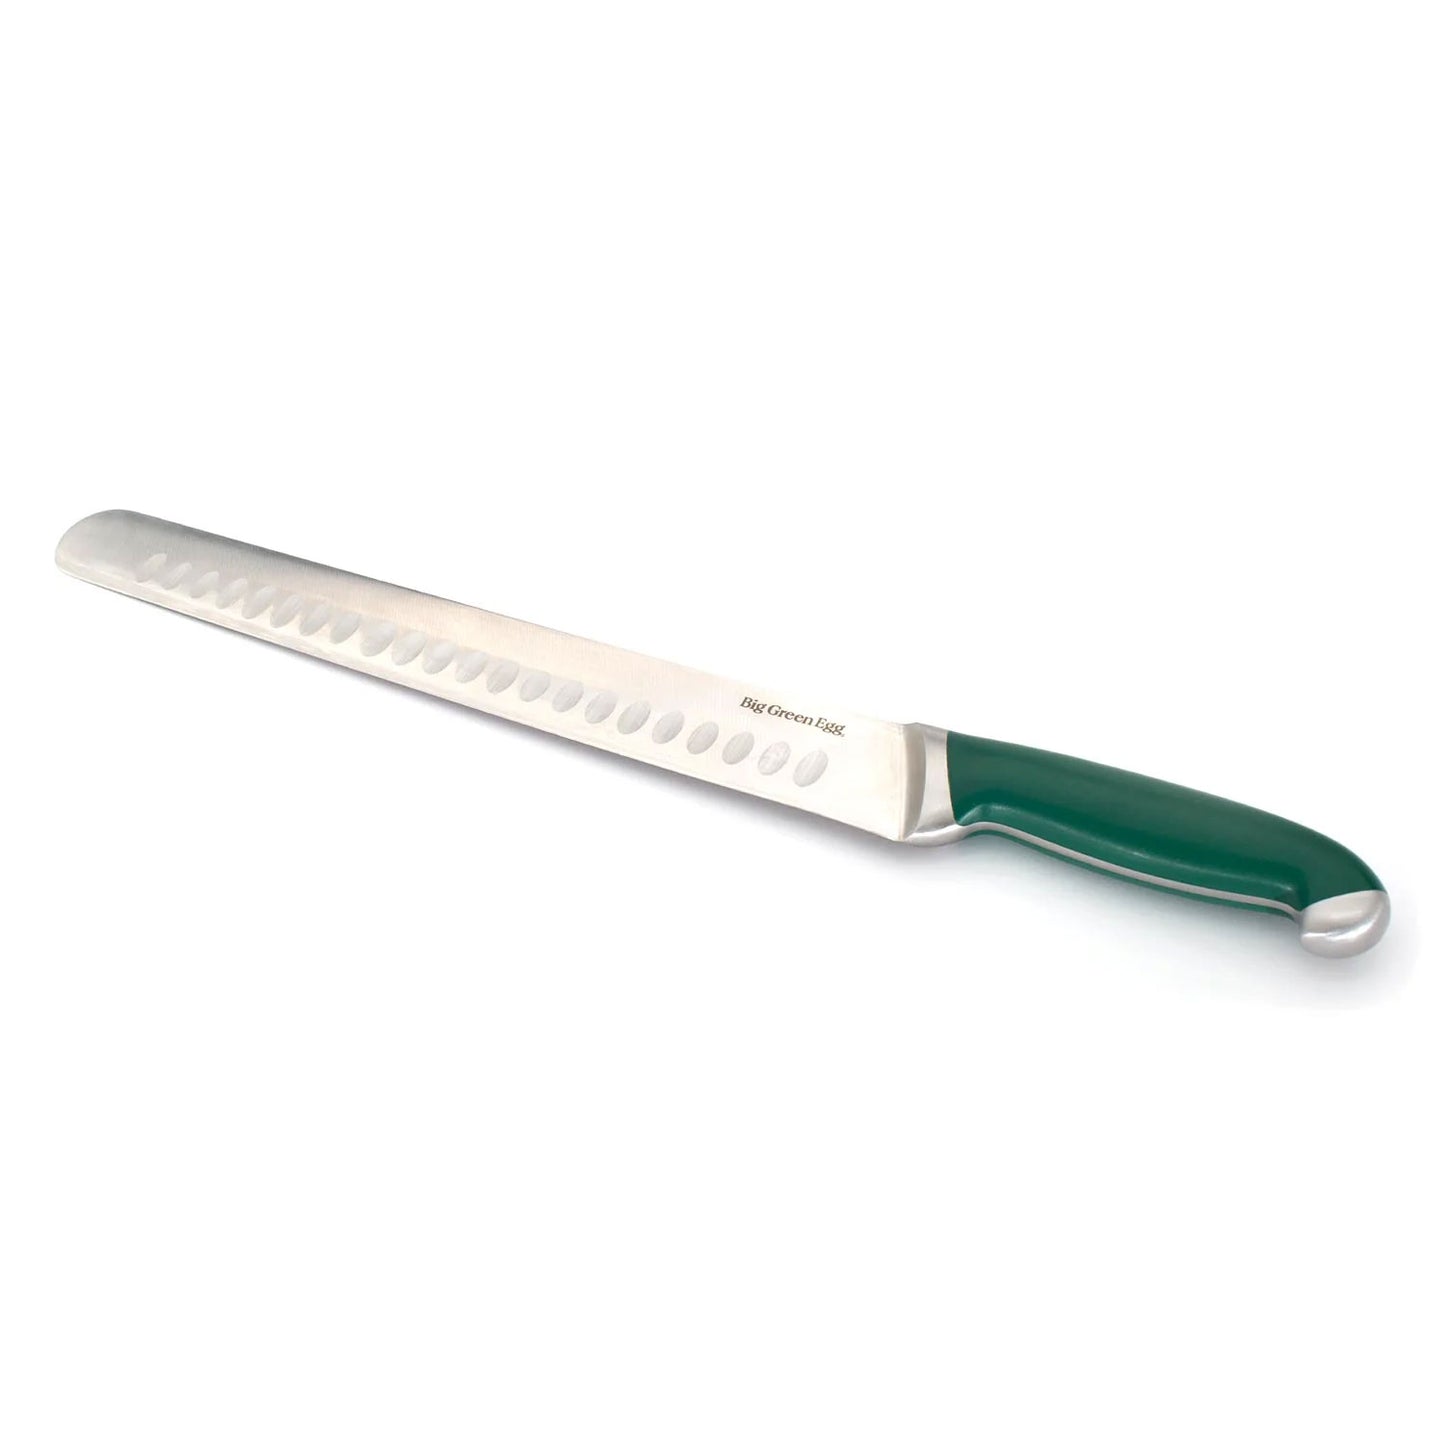 12" Brisket Slicing Knife with Protective Cover